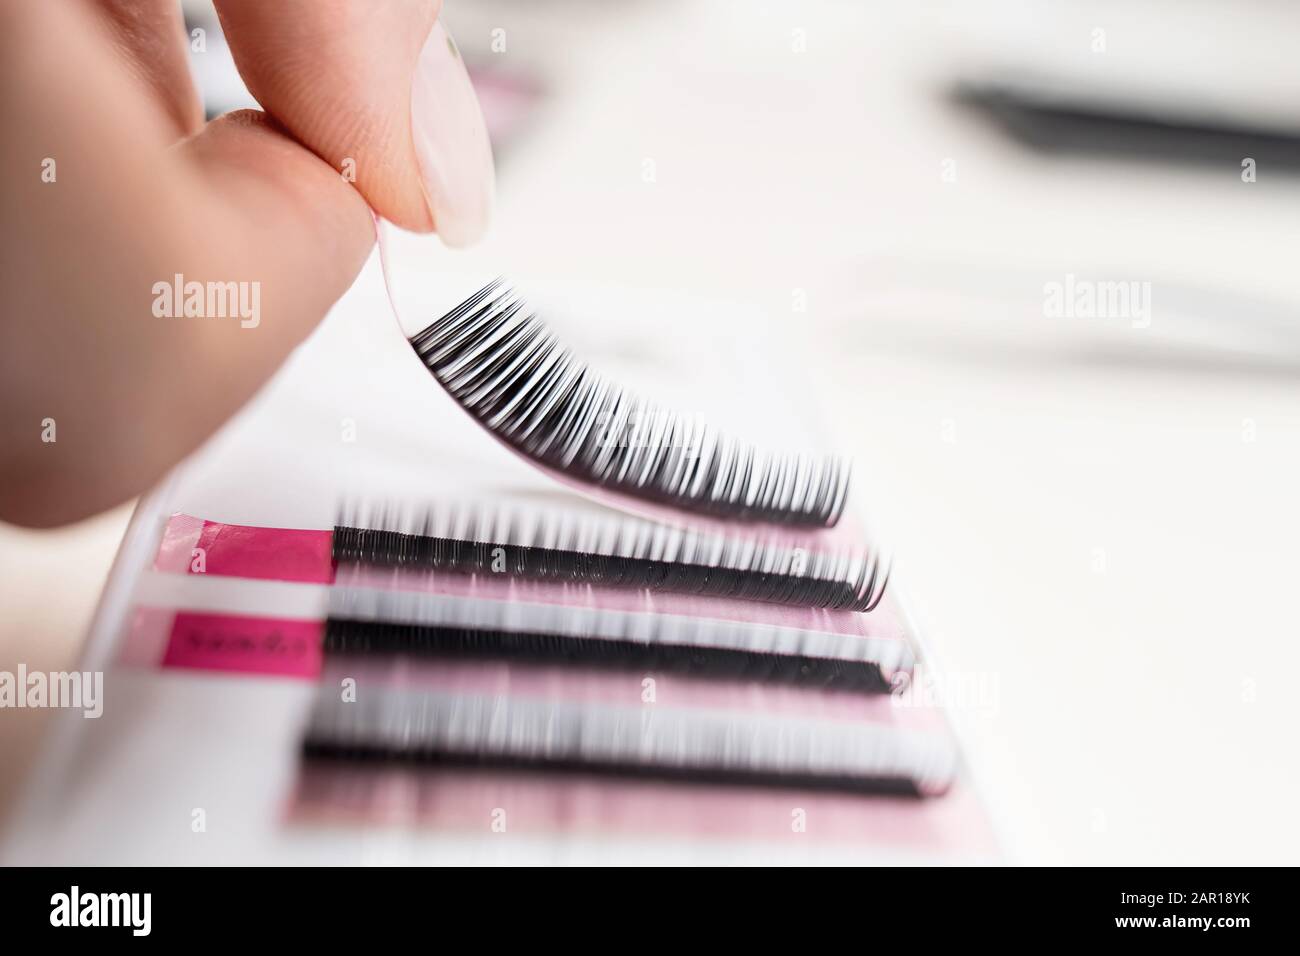 Eyelash Extension tools on white background. Accessories for eyelash extensions. Artificial lashes. Stock Photo